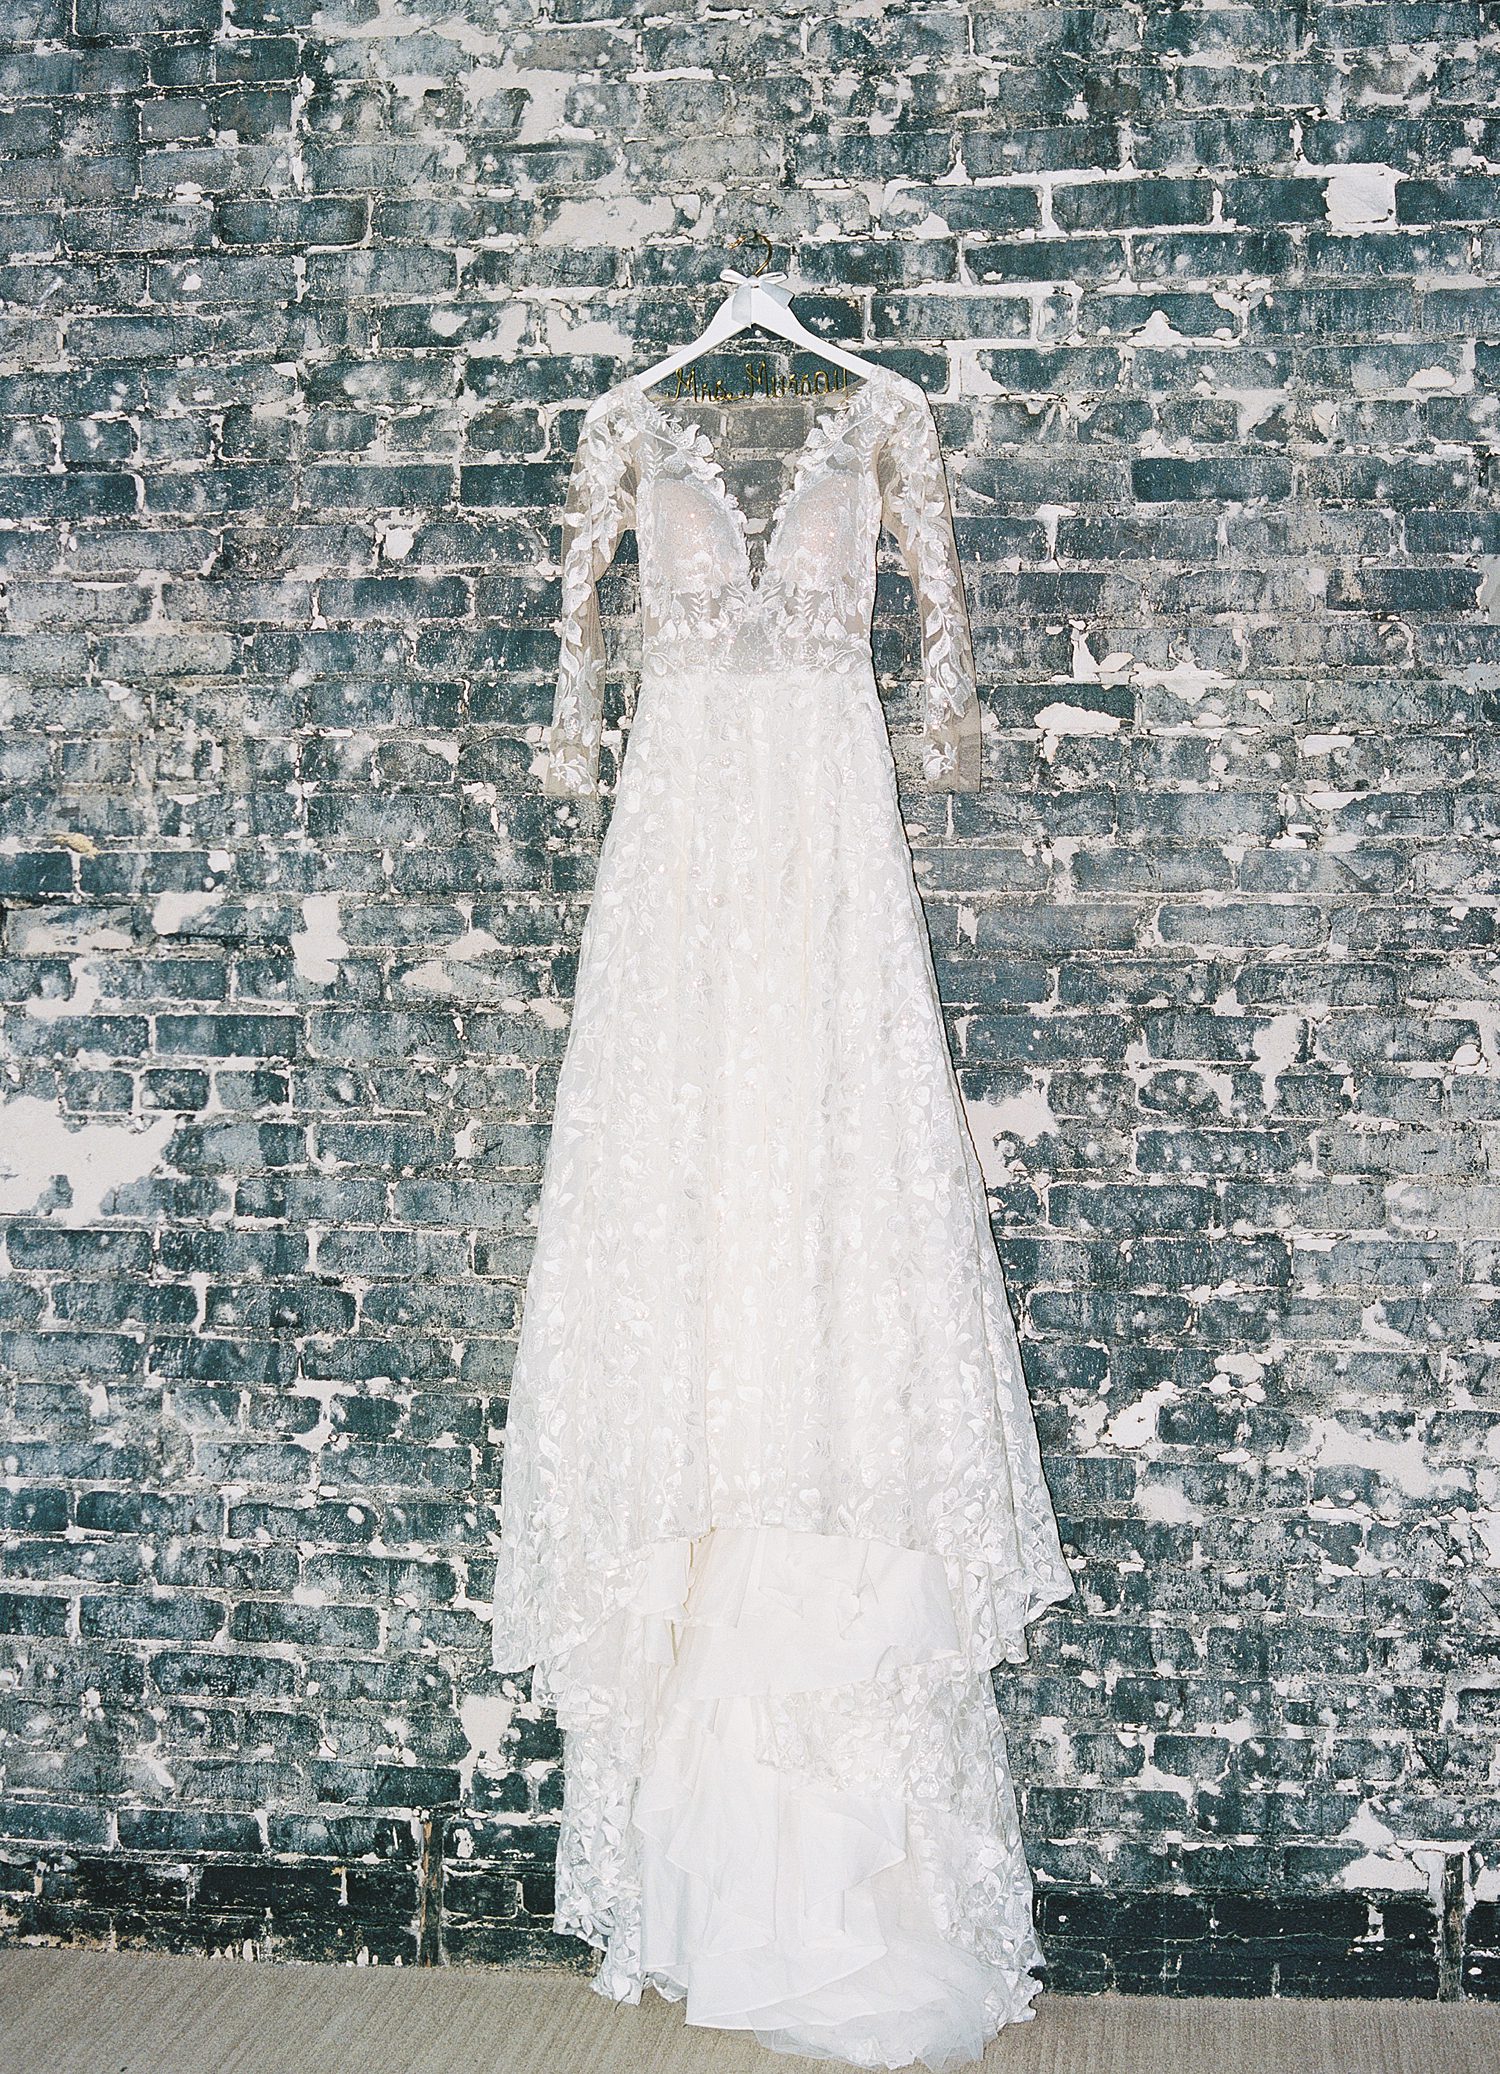 wedding dress with lace sleeves hangs on brick wall inside the Oxford Exchange